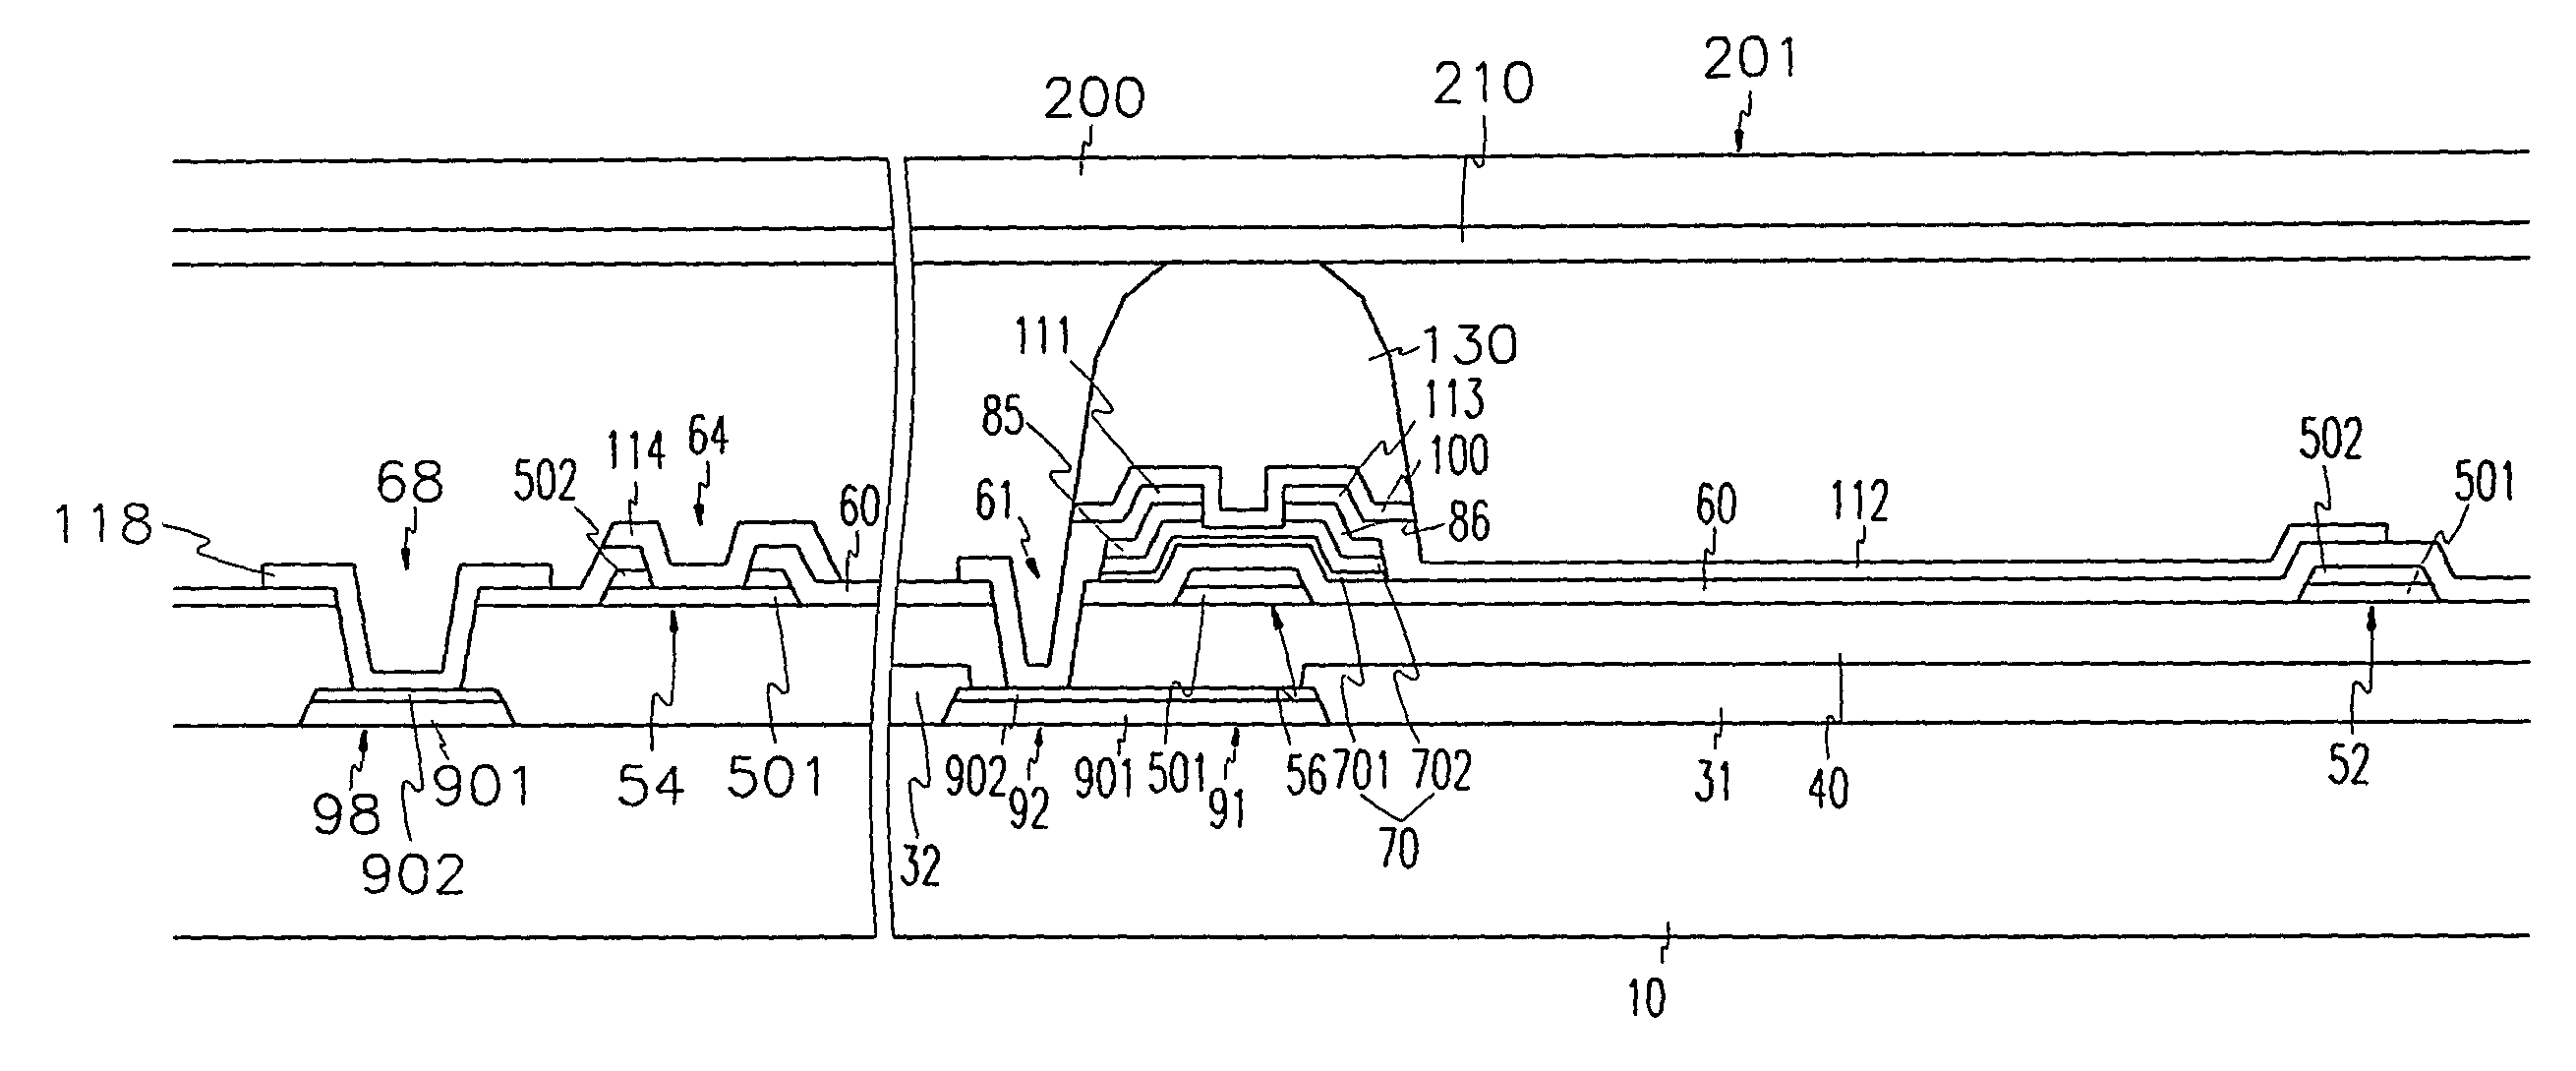 Thin film transistor array panel for a liquid crystal display and methods for manufacturing the same